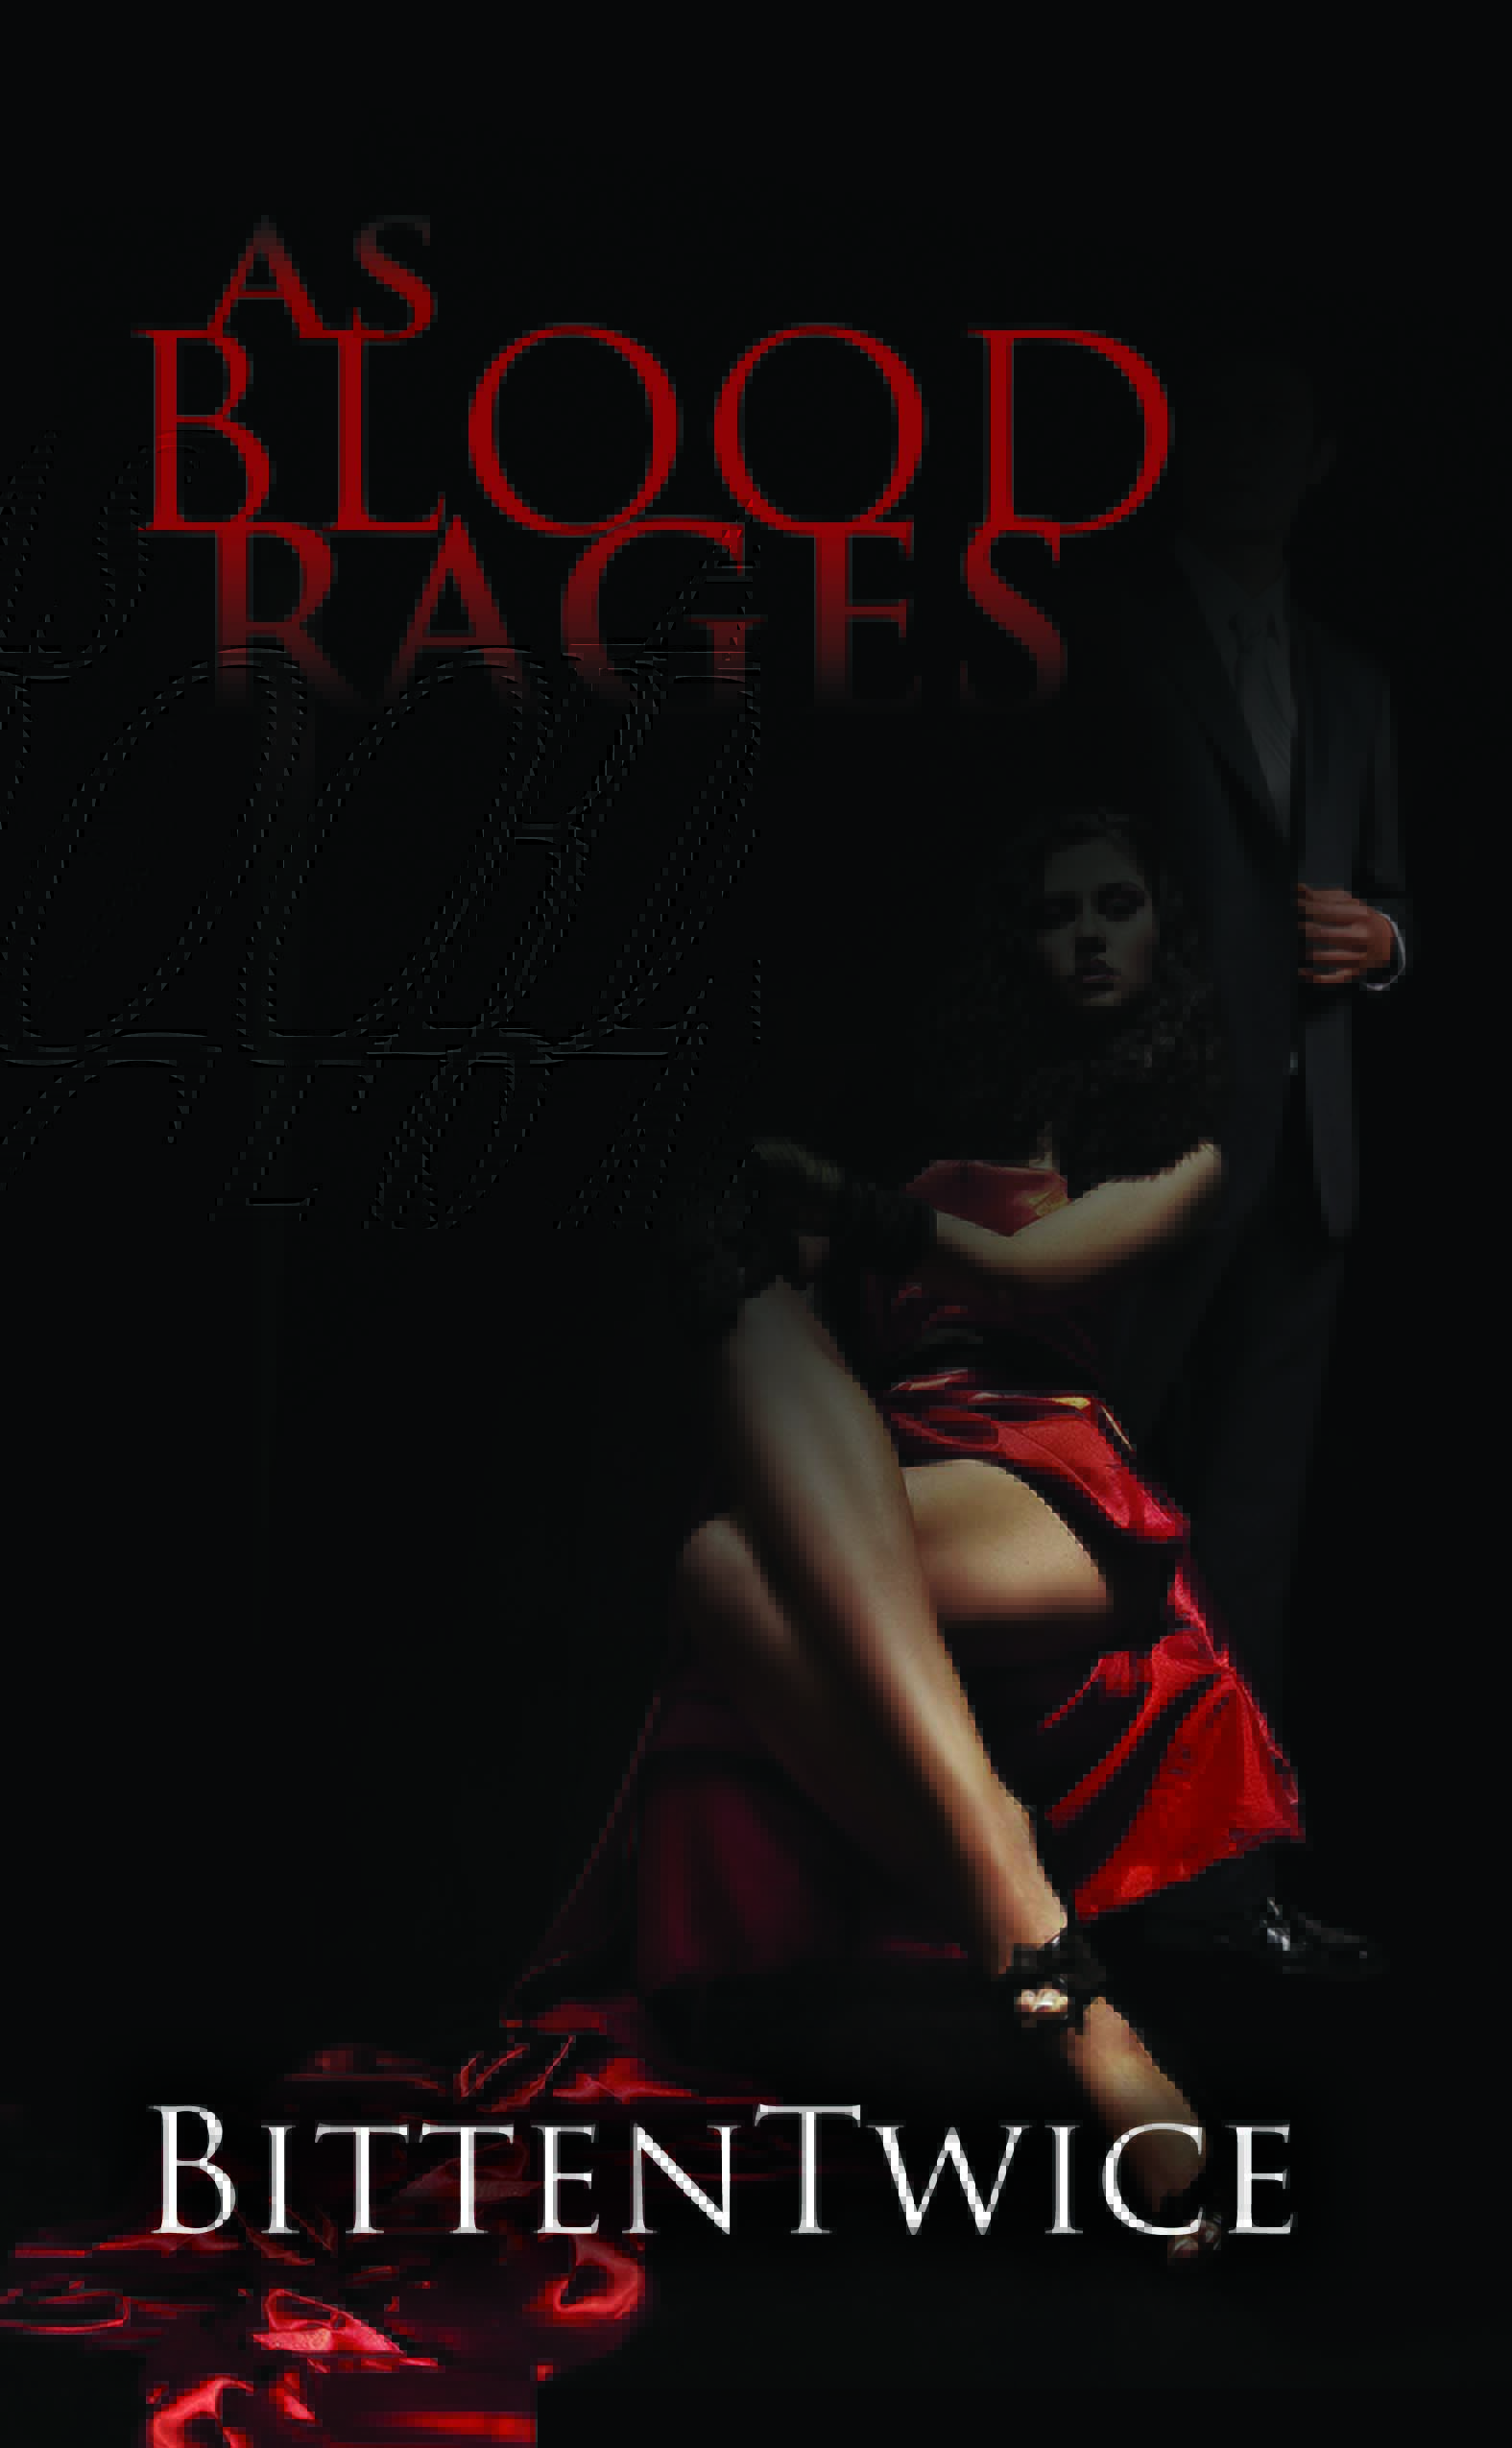 bookcover image for the book As Blood Rages shows a seated woman with a sexy red dress that bares her crossed legs, the train of the dress is draped in a river of silk flowing in front of her, while a man stands behind her in the shadows